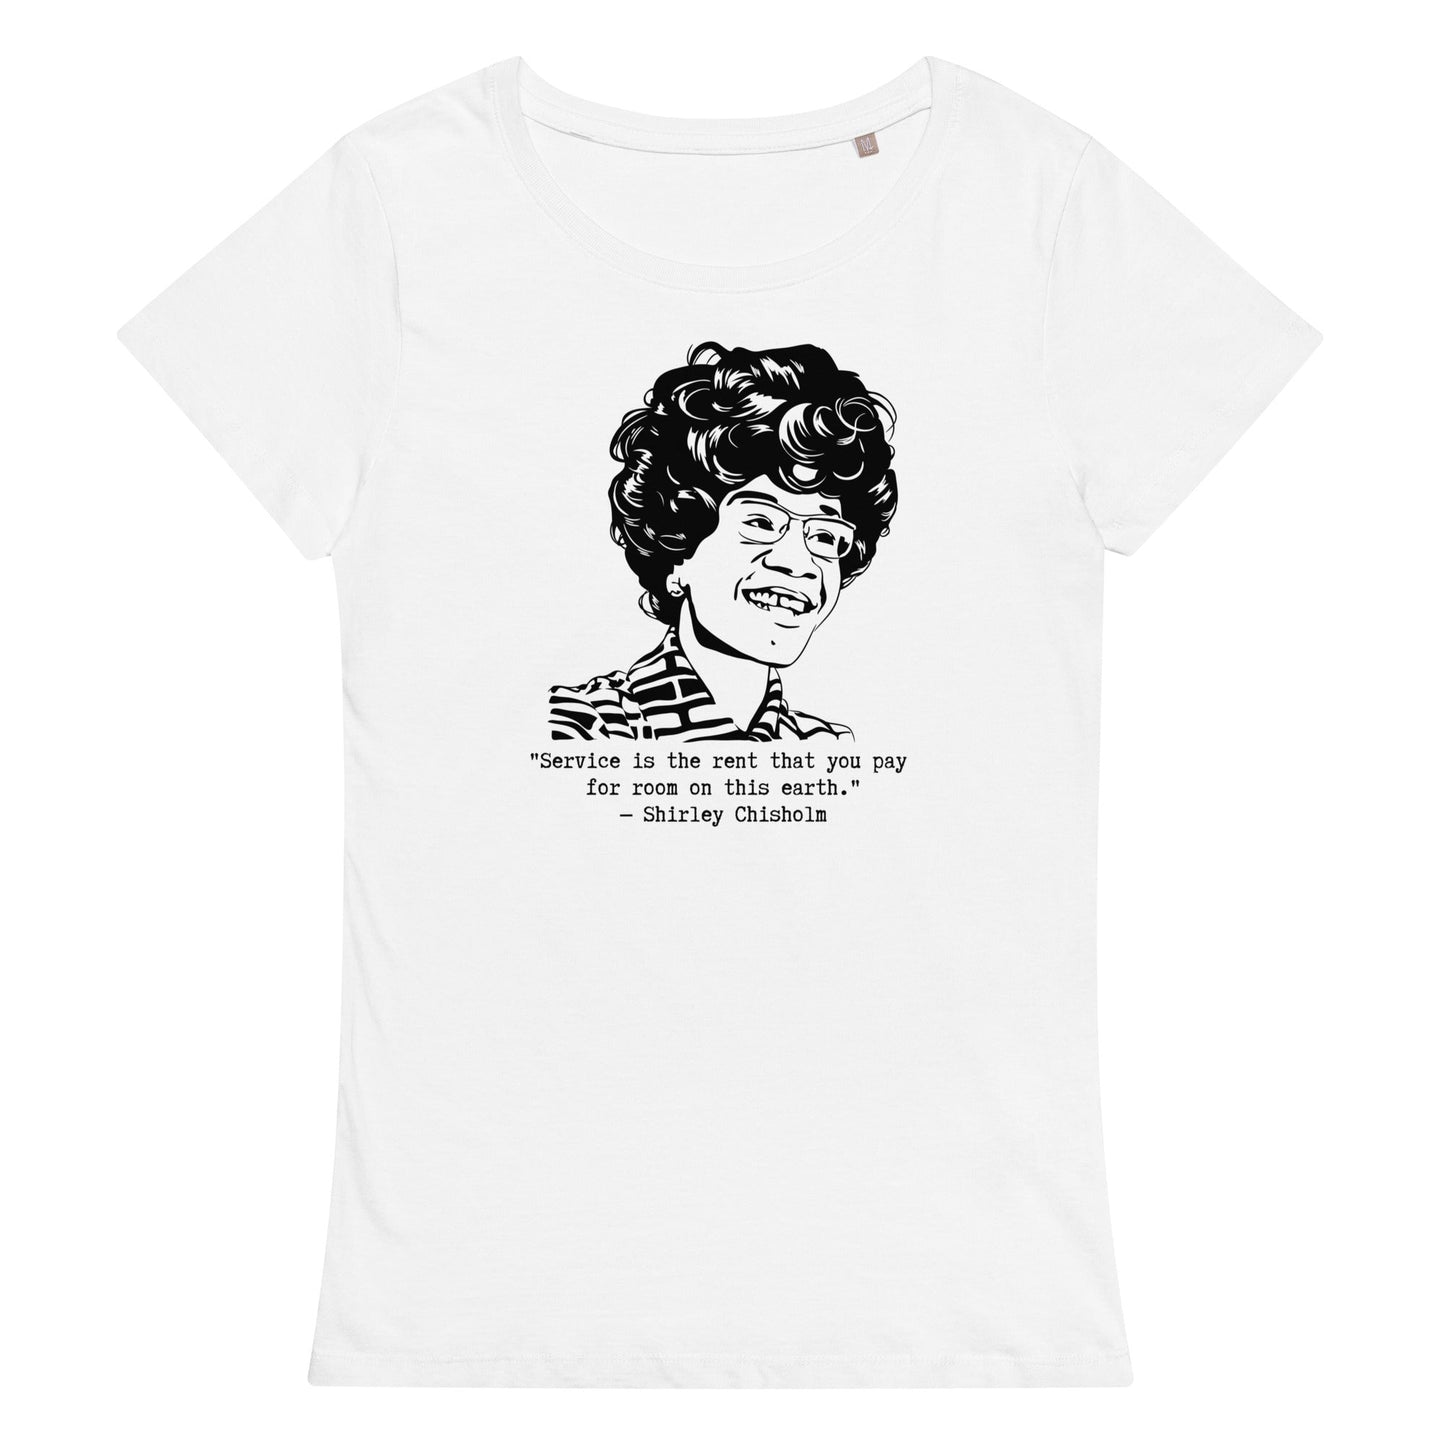 Shirley Chisholm "Service is the Rent" organic t-shirt